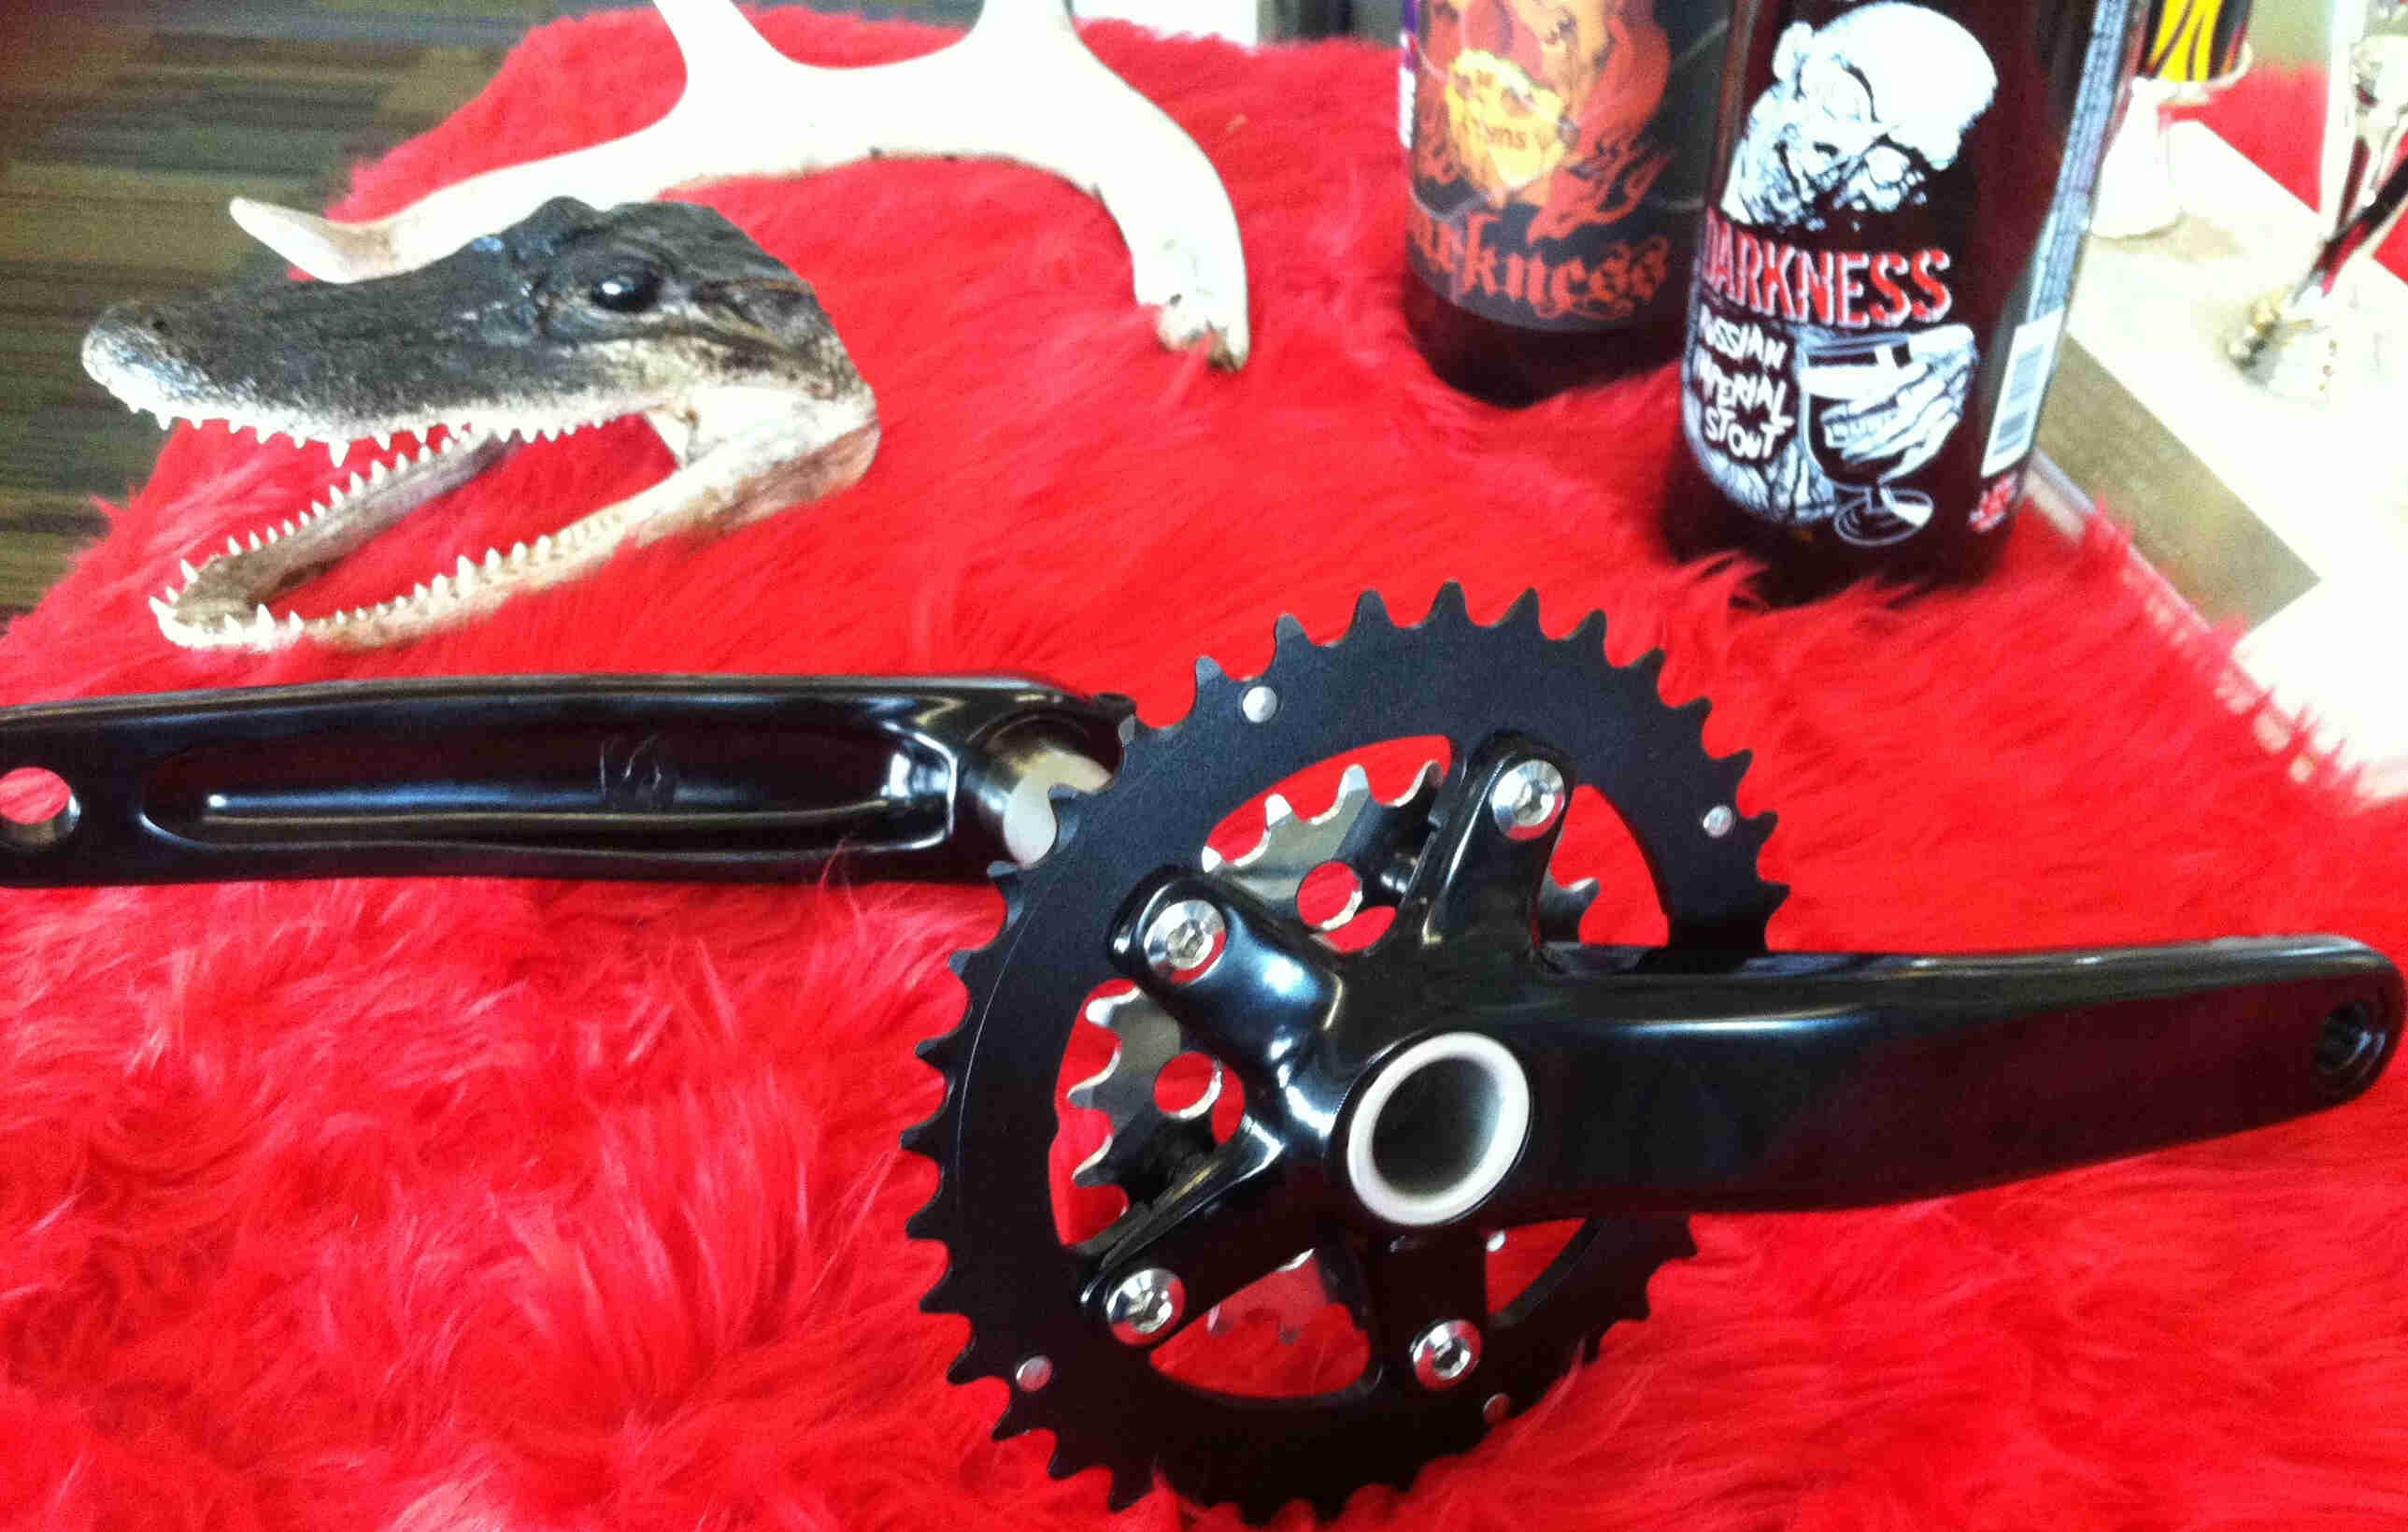 Side view of a Surly O.D bike crankset, on a red table with an alligator head and cans in the background